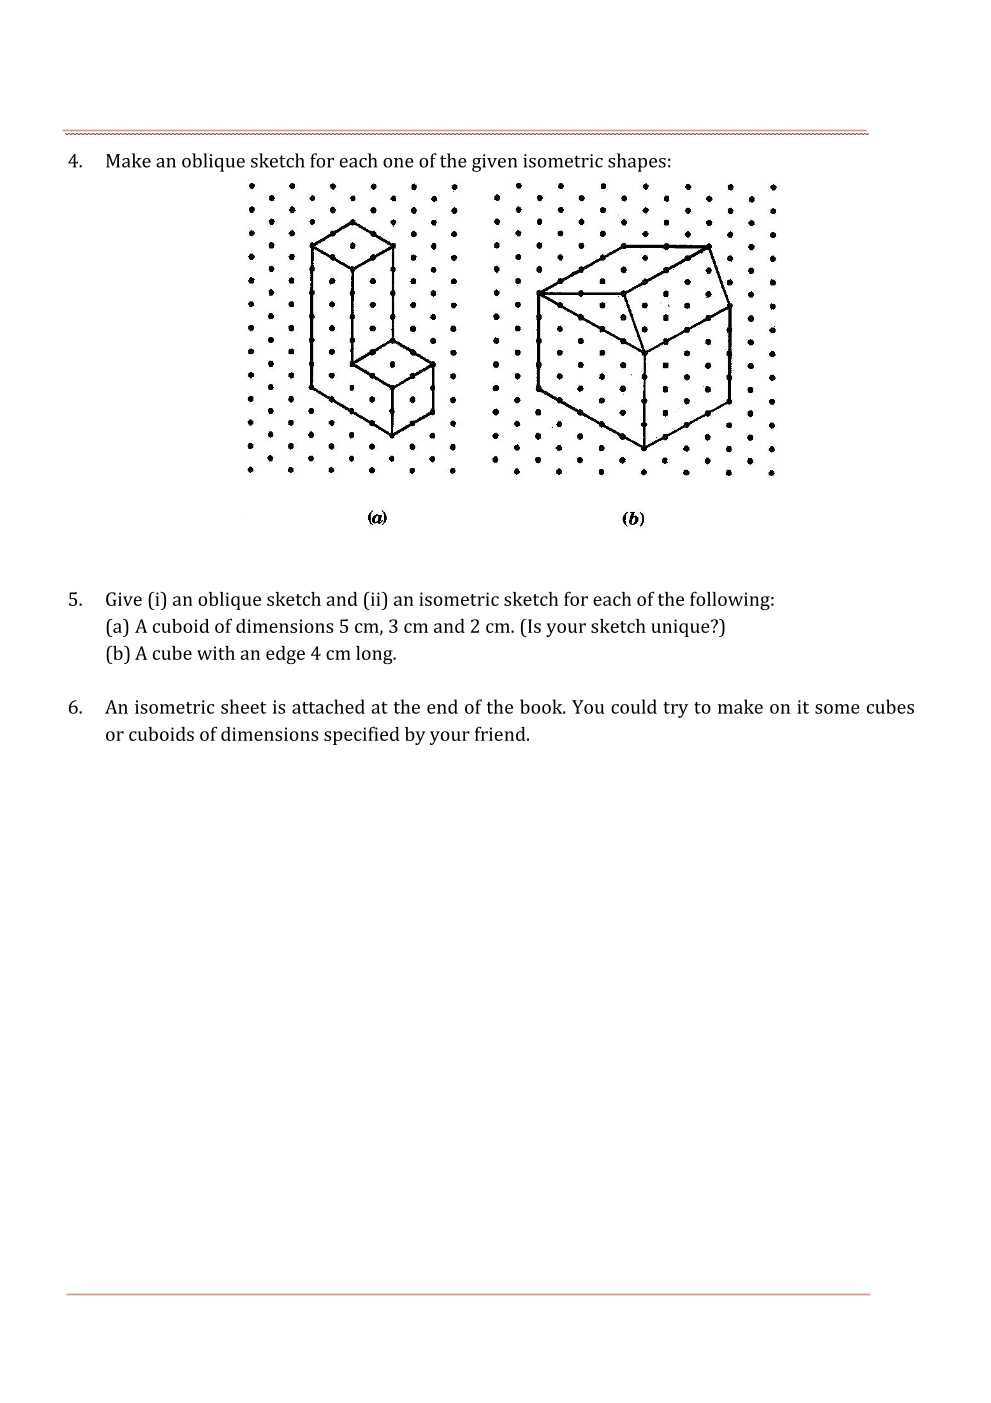 NCERT Solutions For Class 7 Maths Chapter 15 Visualising Solid Shapes